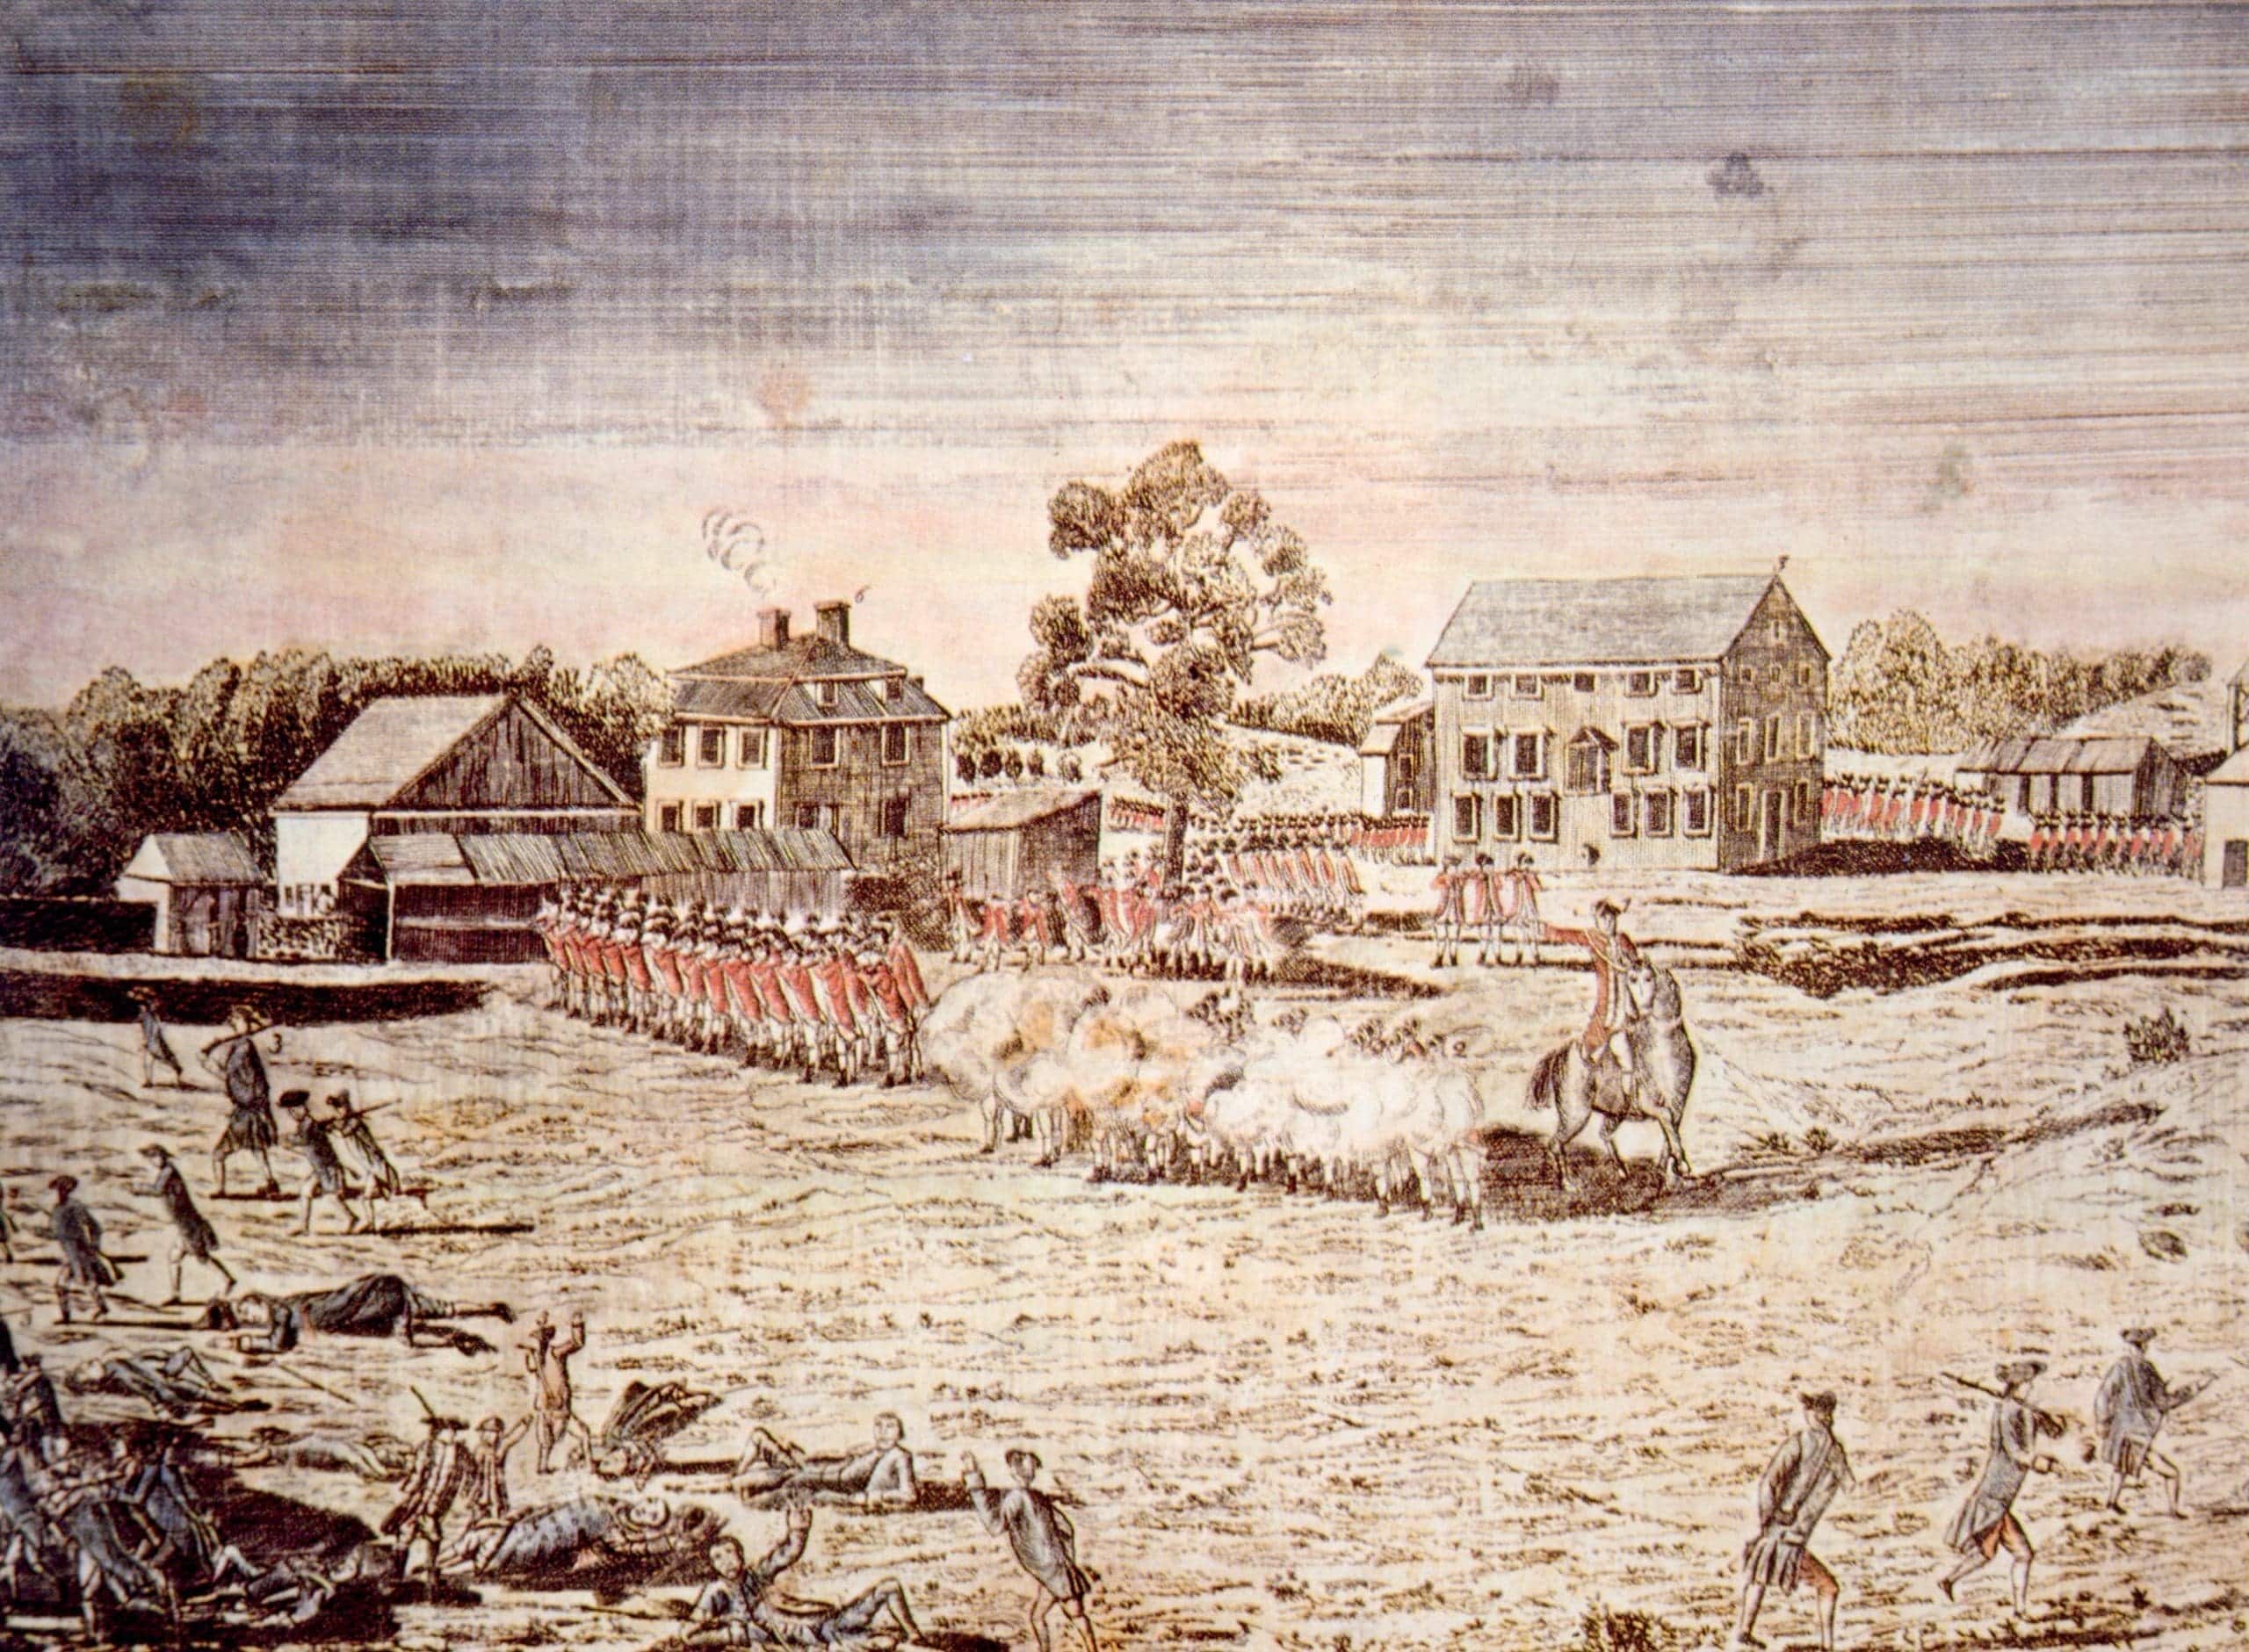 Battle of Lexington and Concord Self-Guided Driving Tour